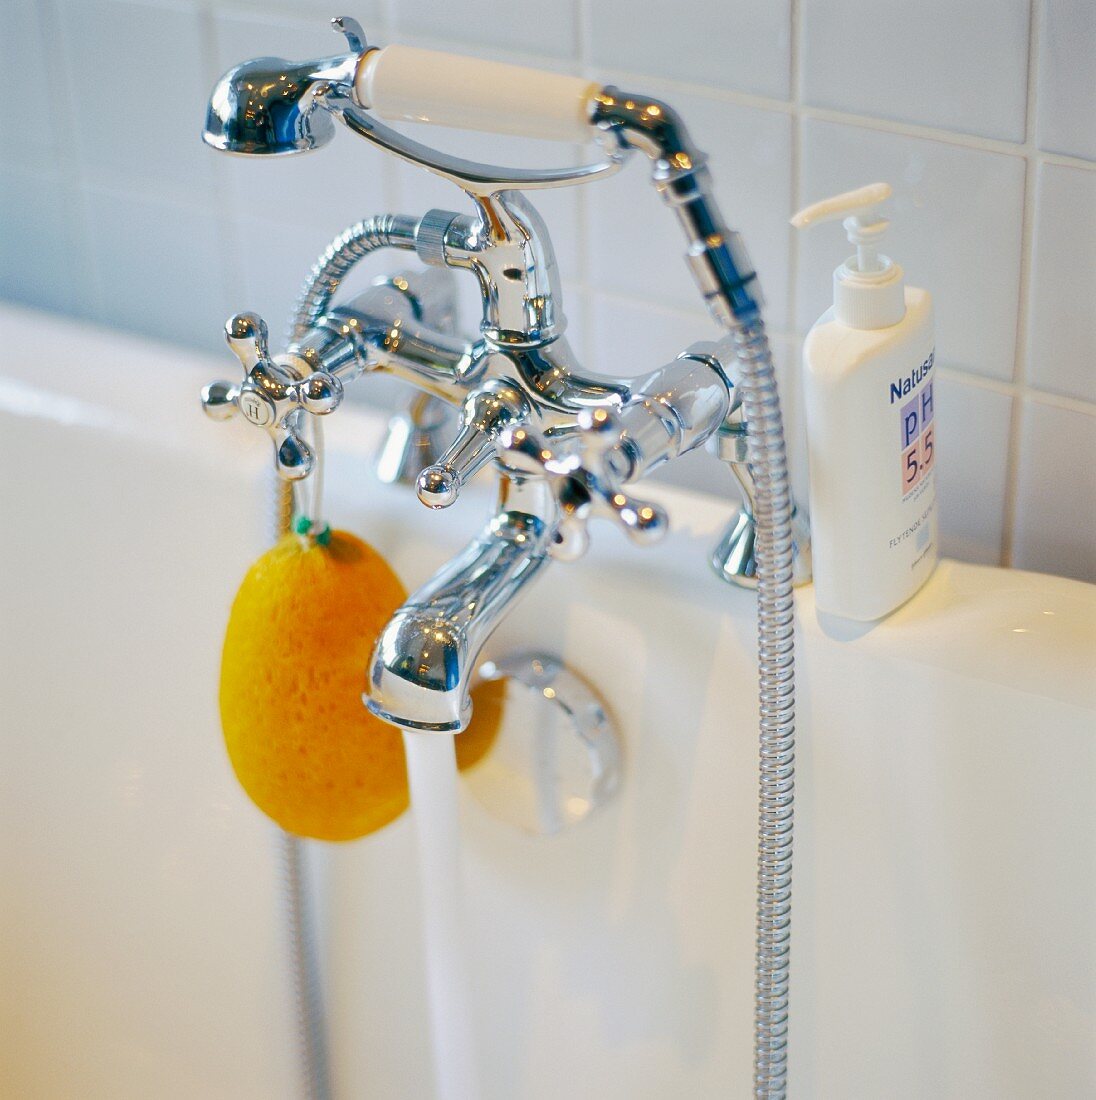 Bathtub tap fittings with hand-held shower head